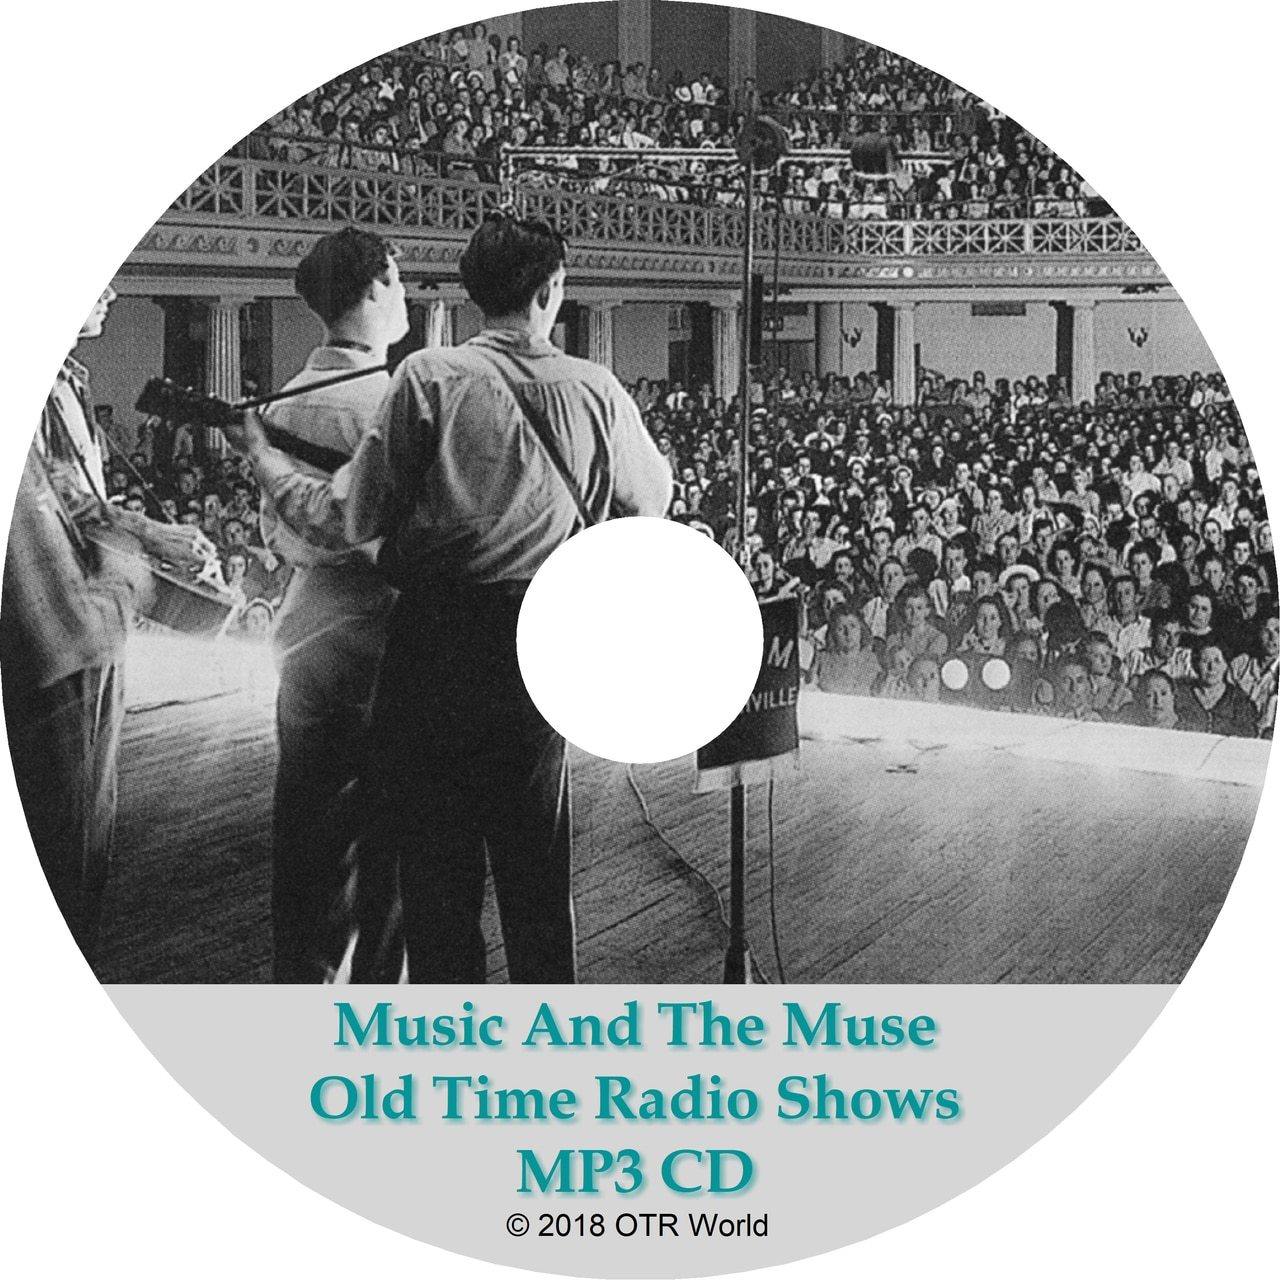 Music And The Muse Old Time Radio Shows 13 Episodes On MP3 CD - OTR World